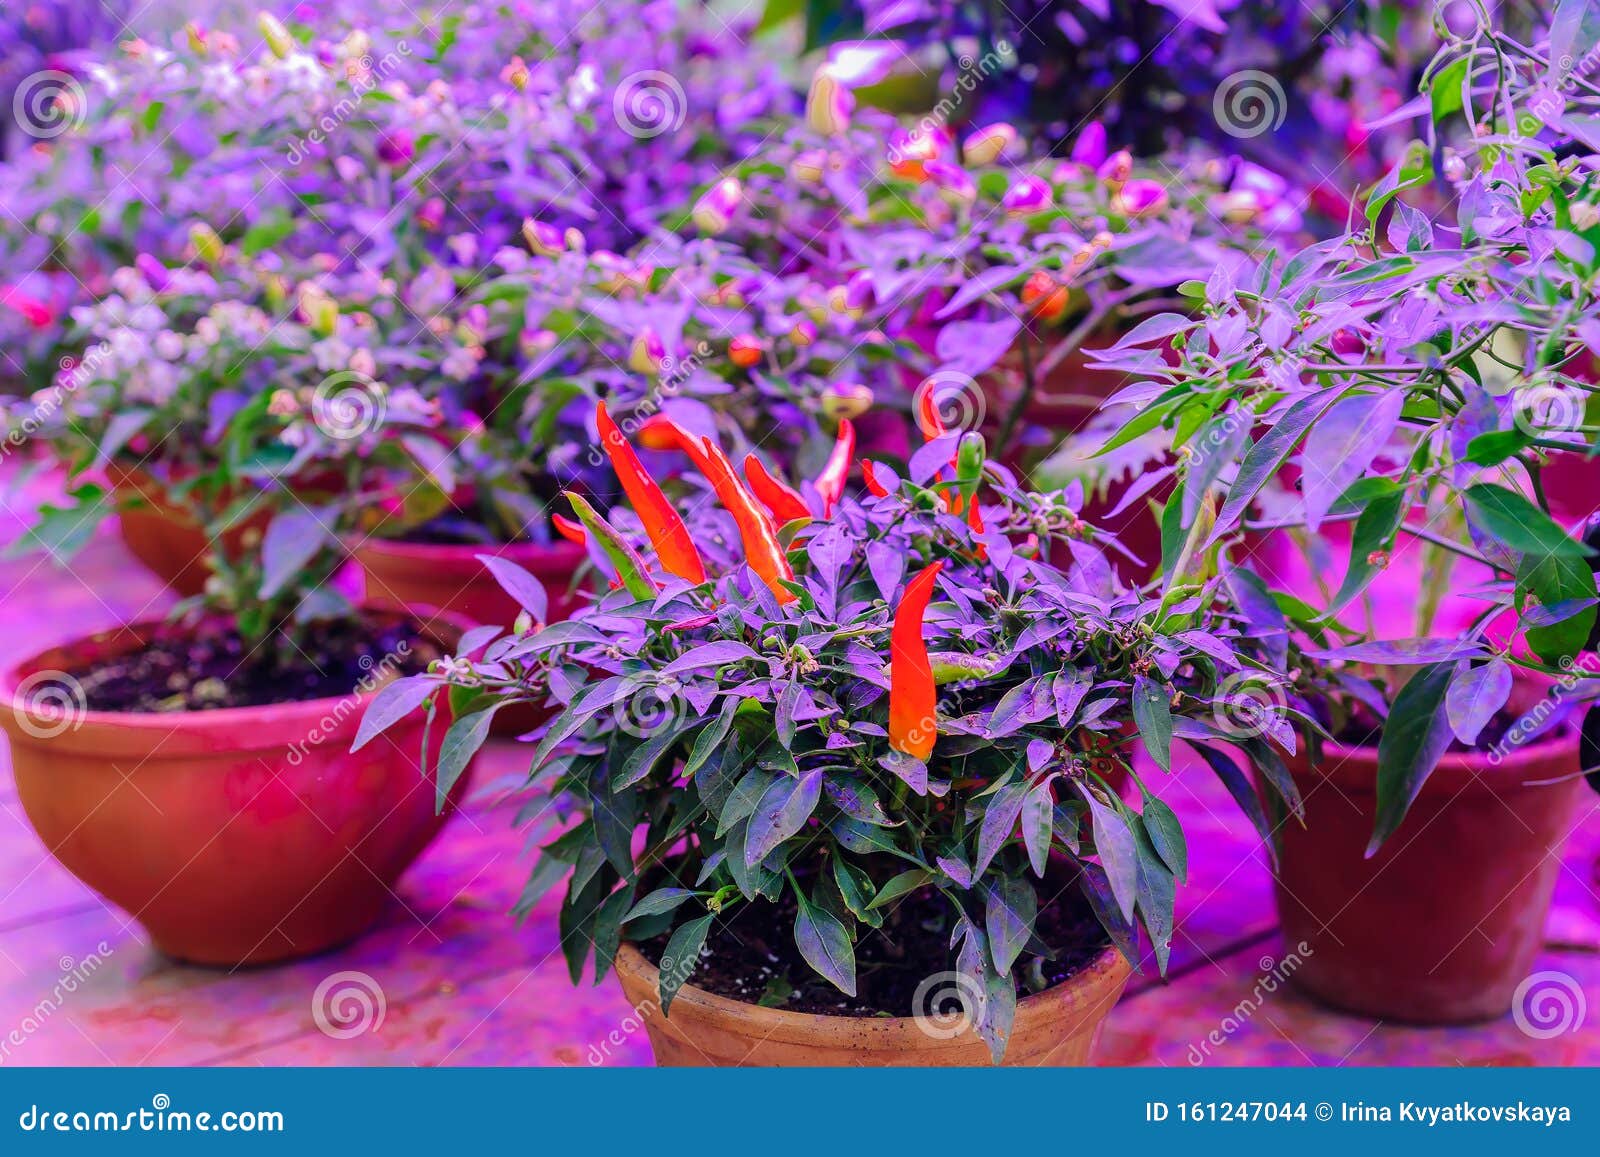 Growing Vegetables Under LED Grow Light Stock Photo - Image of indoor